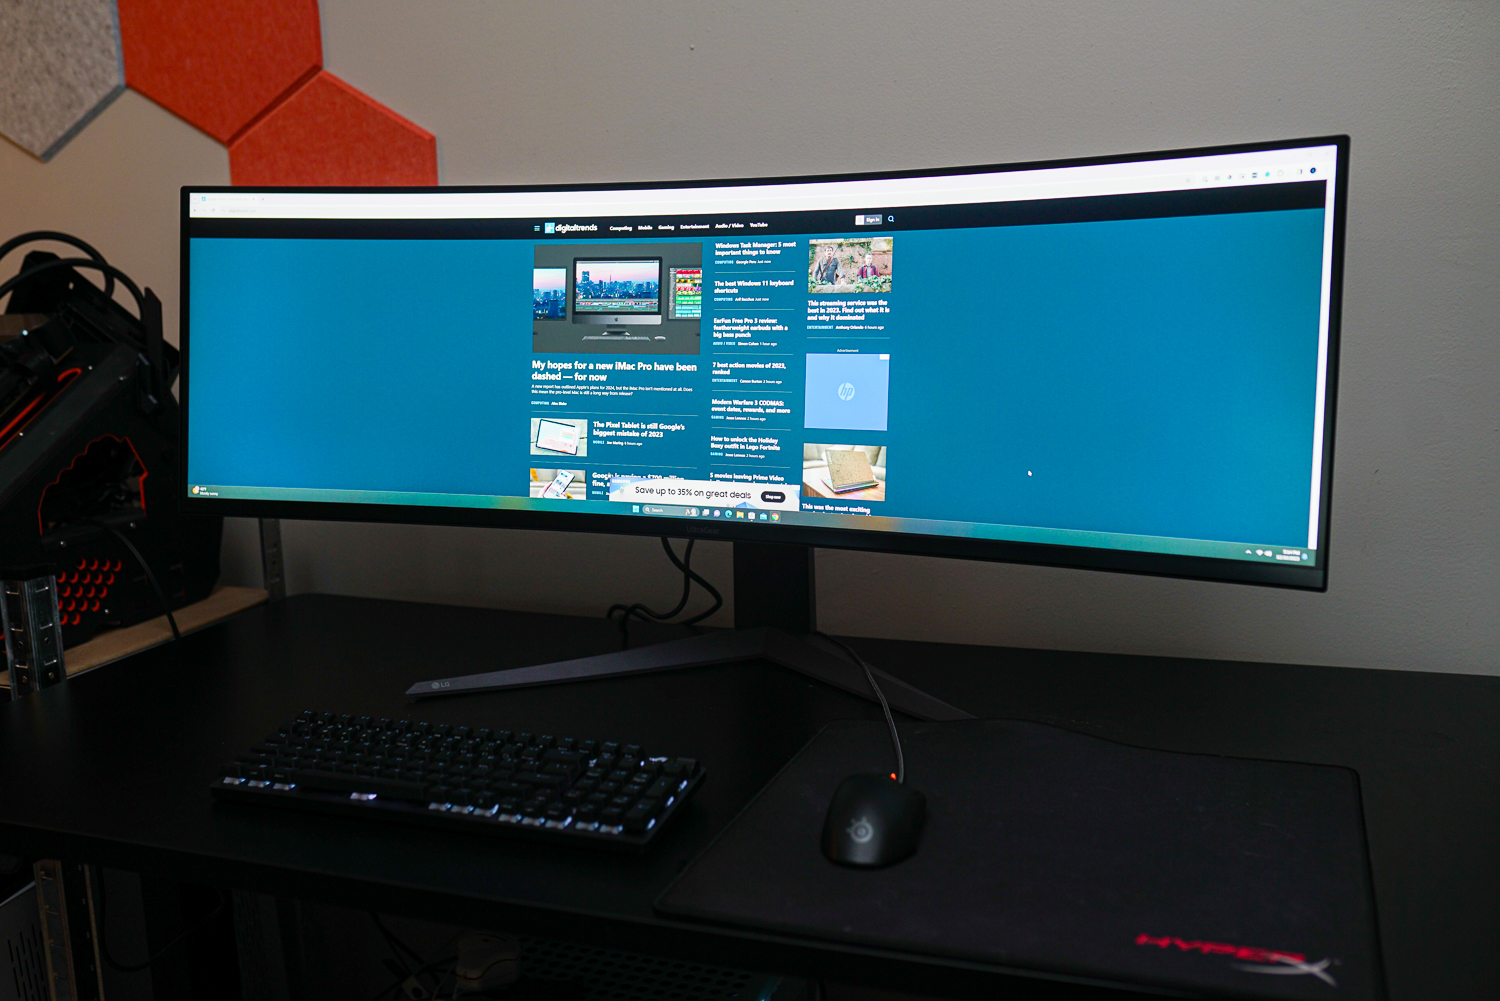 The LG UltraGear 45 monitor showing the Digital Trends website.